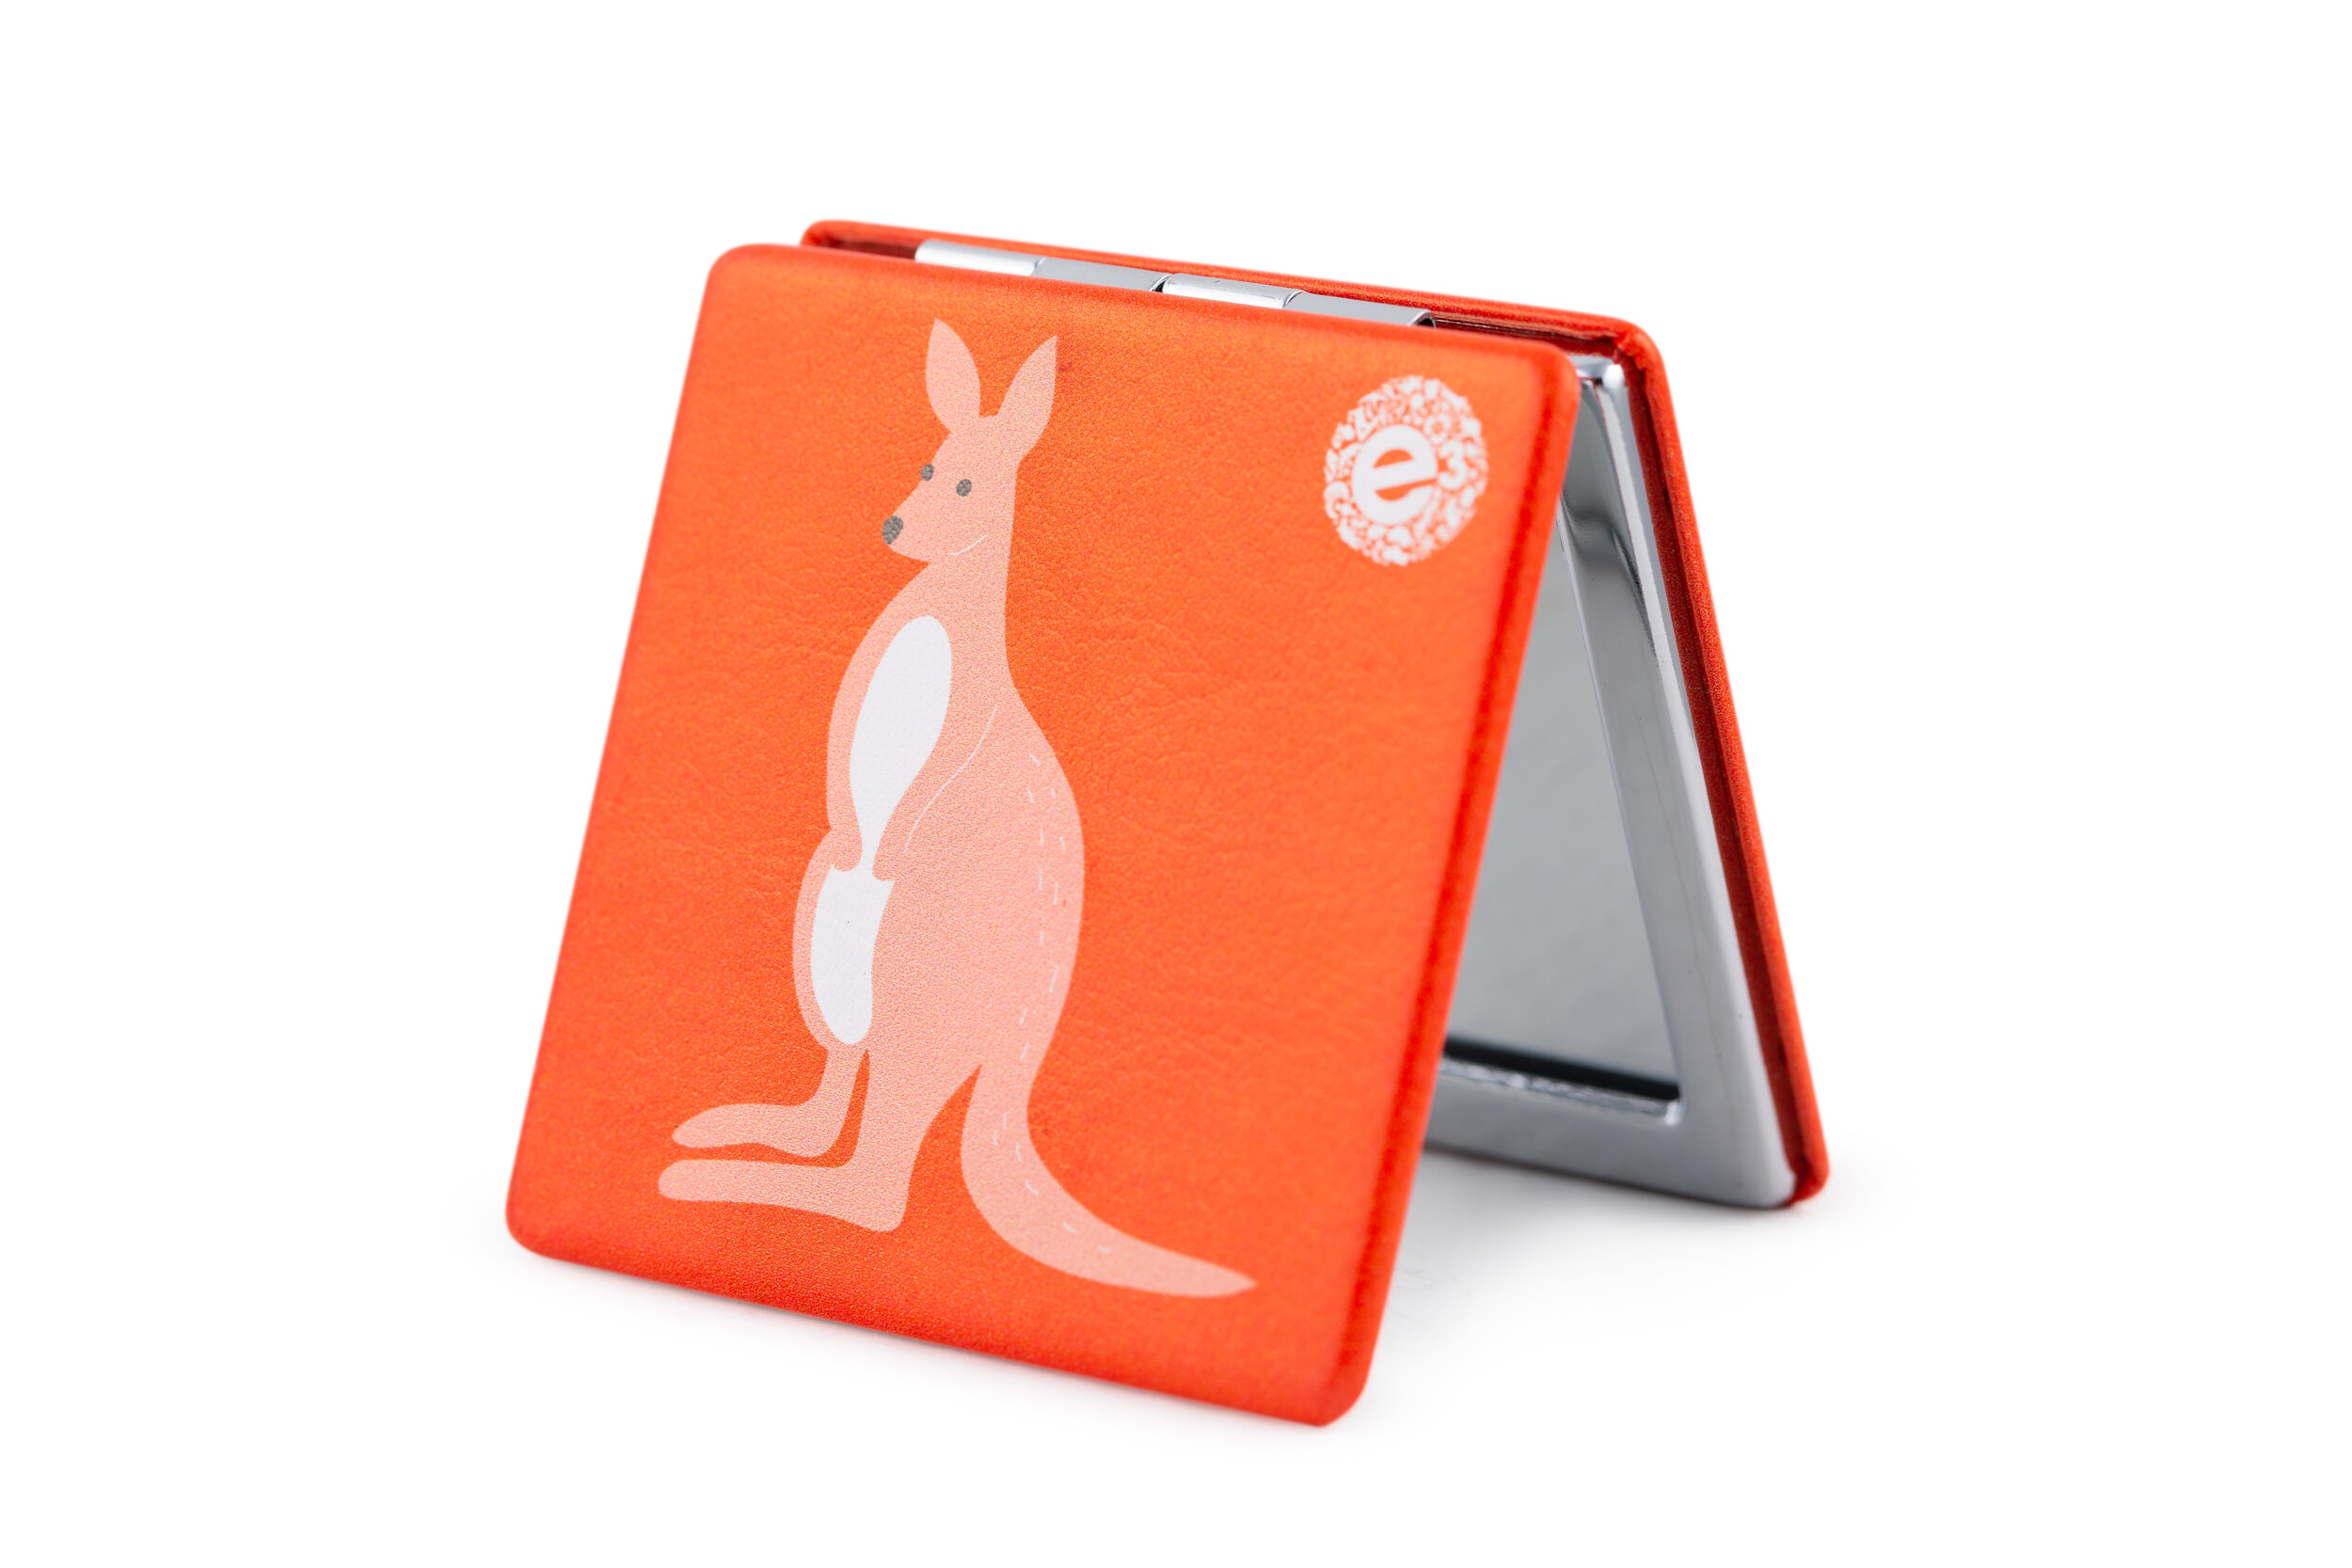 Buy Kangaroo Themed Gifts Online Authentic Australian Made Souvenirs   Bits of Australia